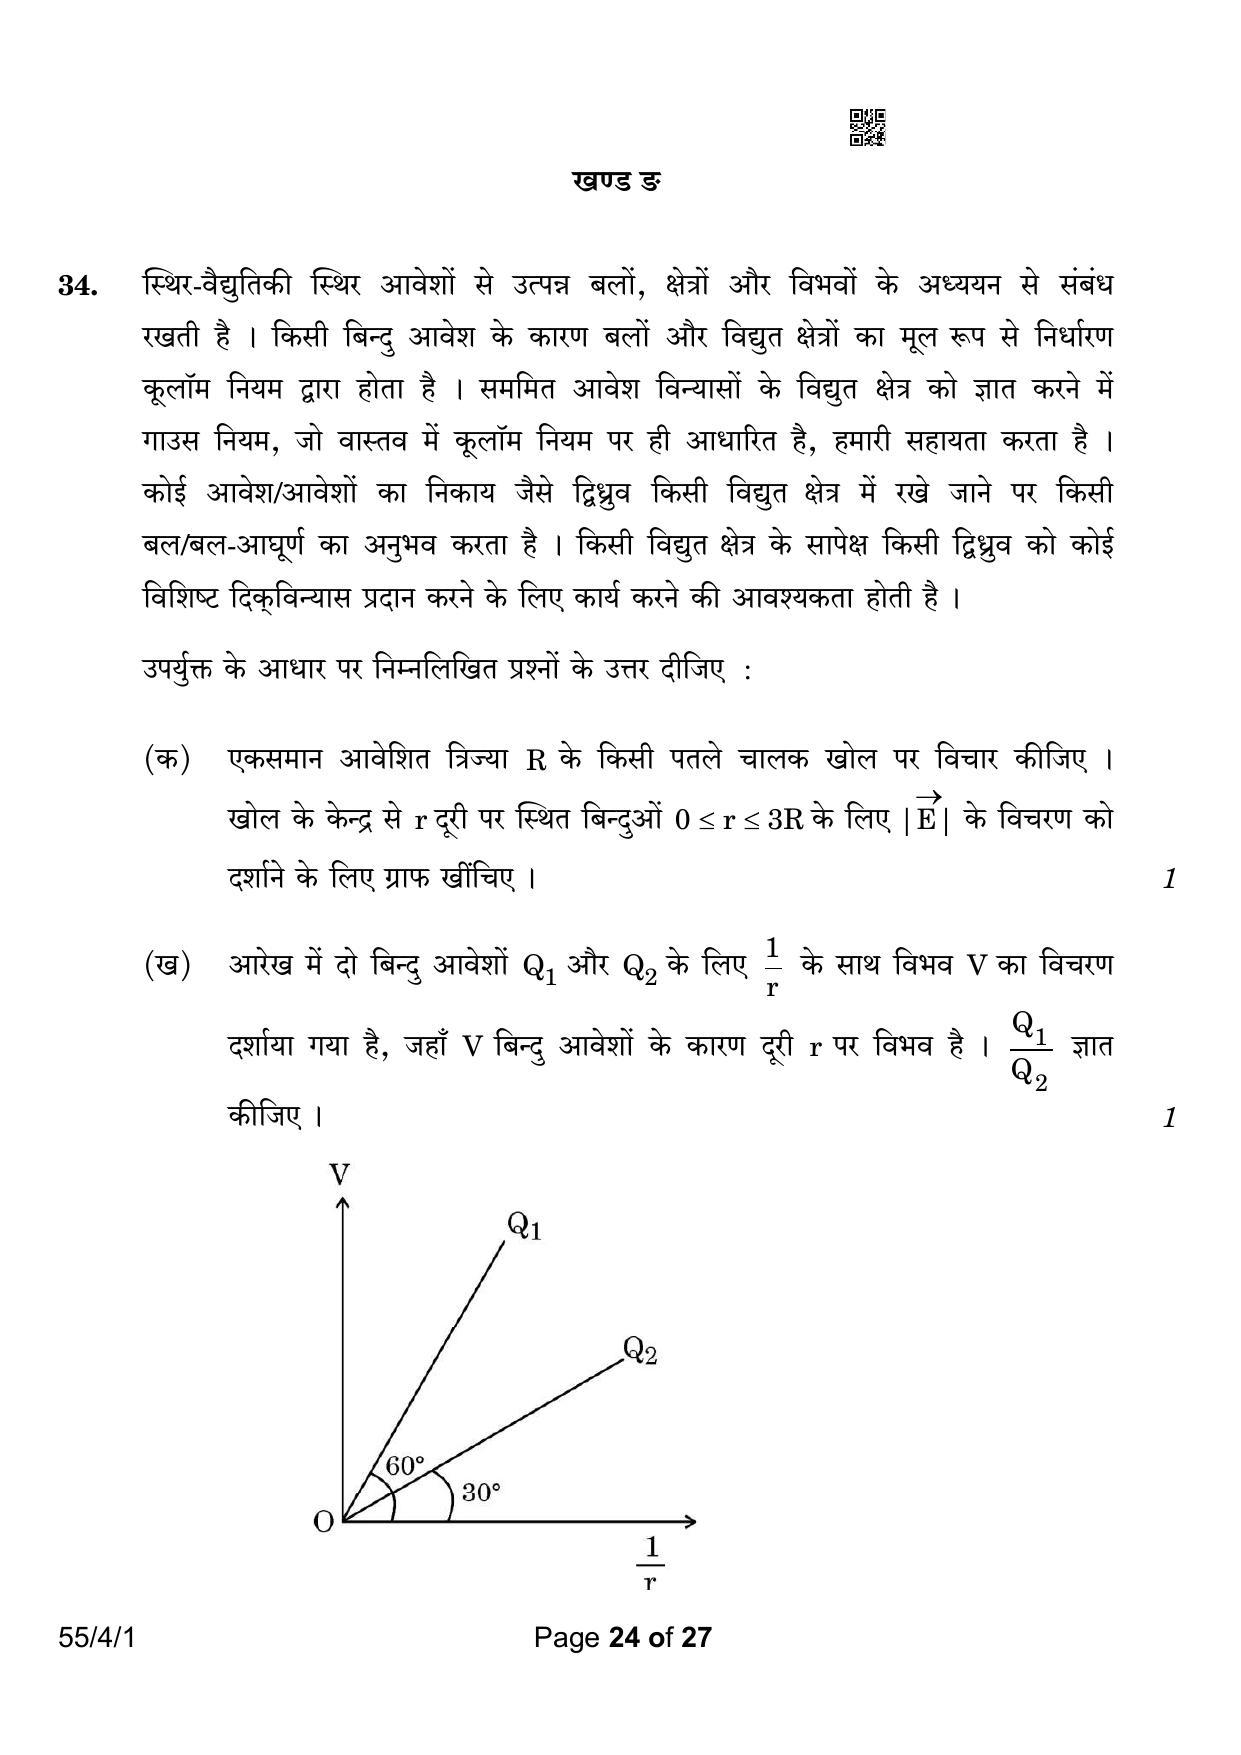 CBSE Class 12 55-4-1 Physics 2023 Question Paper - Page 24